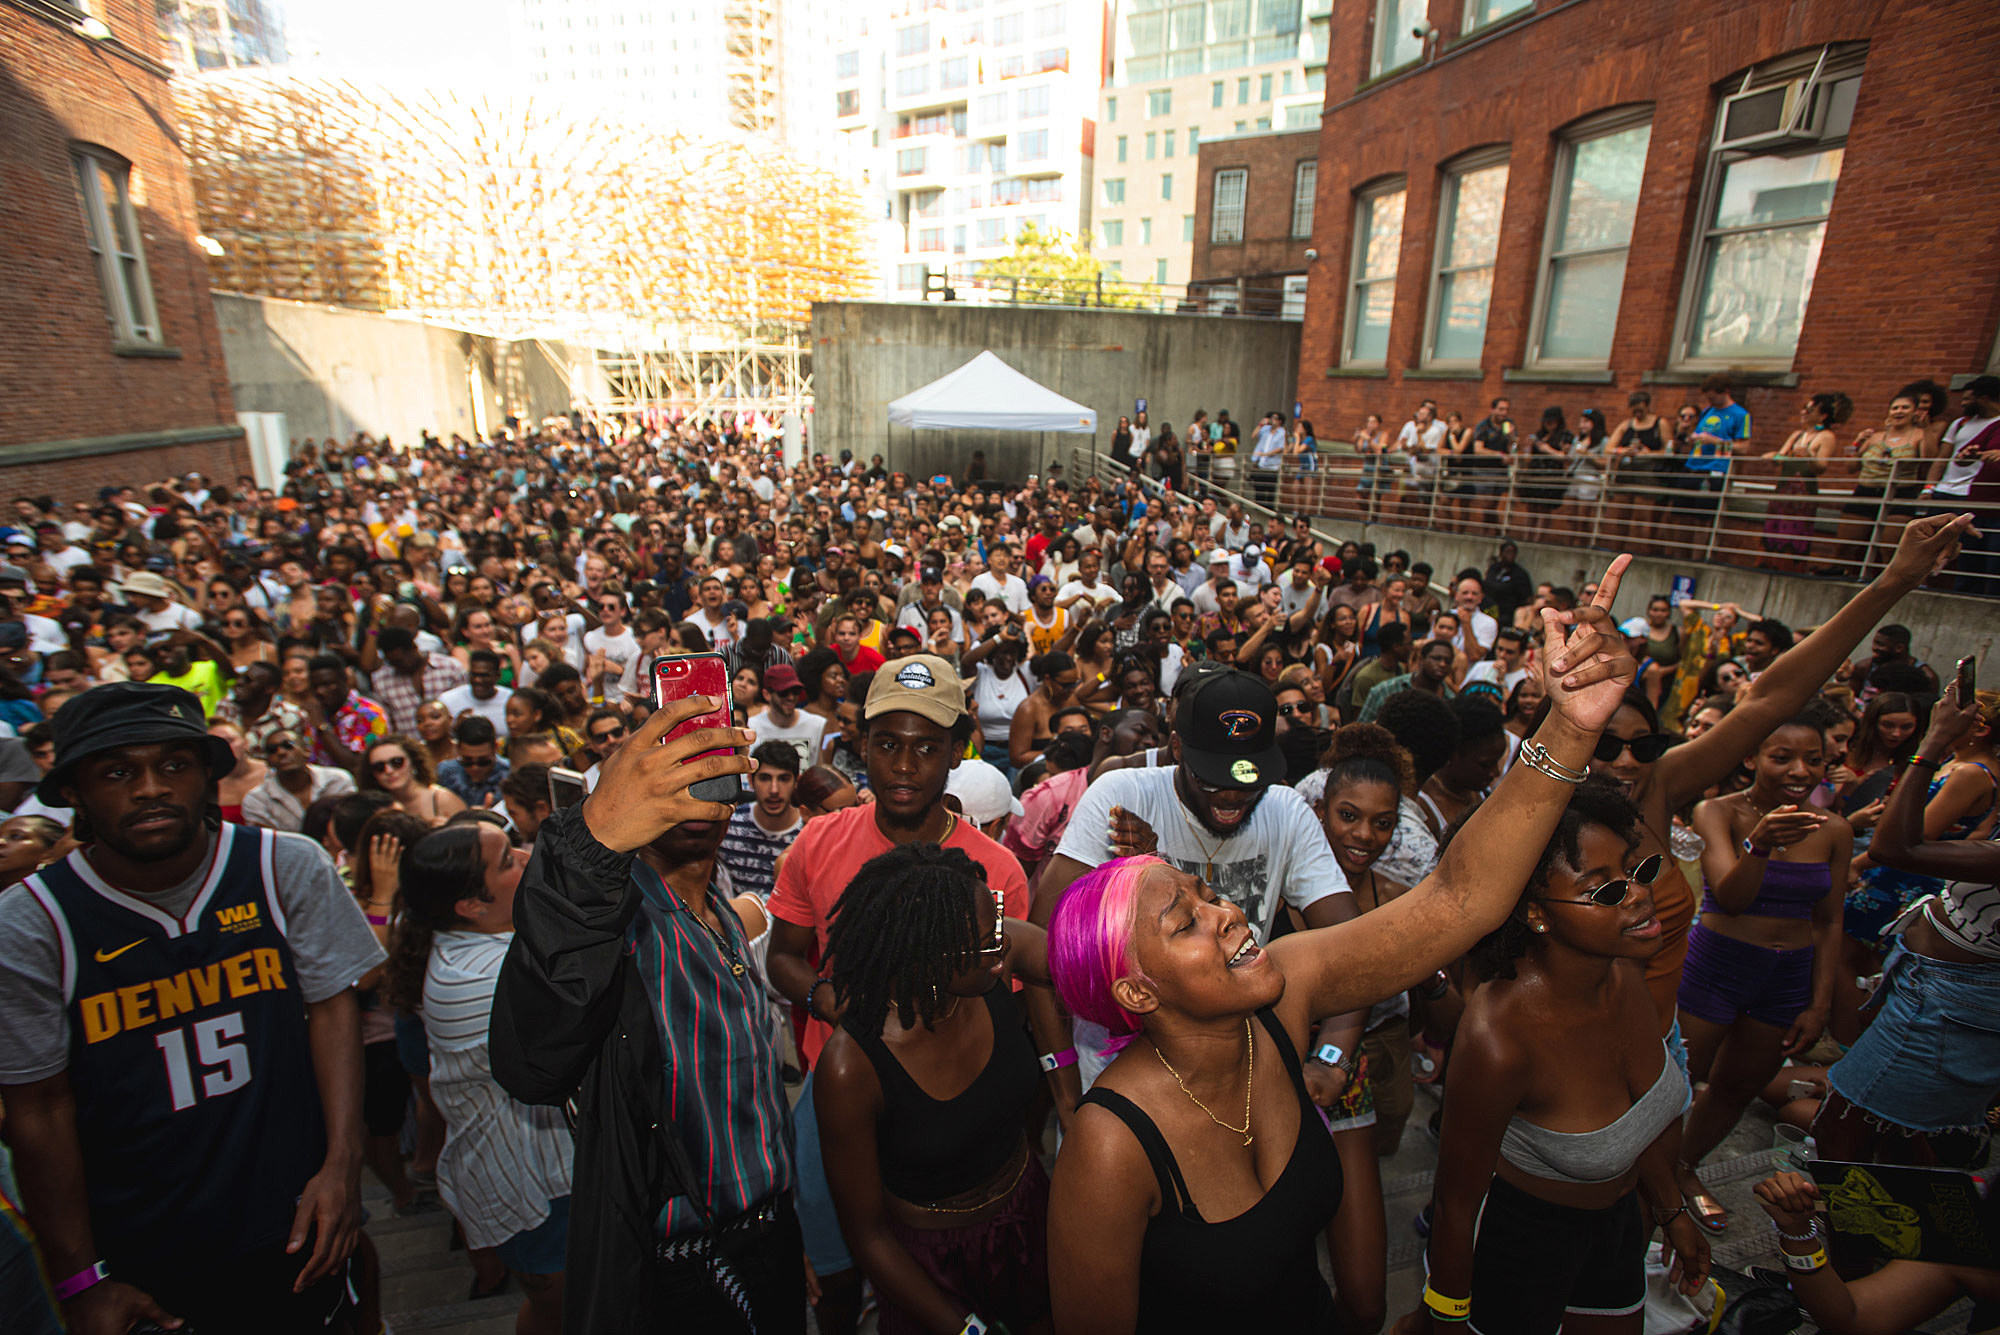 MoMA PS1's Ups in August (2021 lineups)